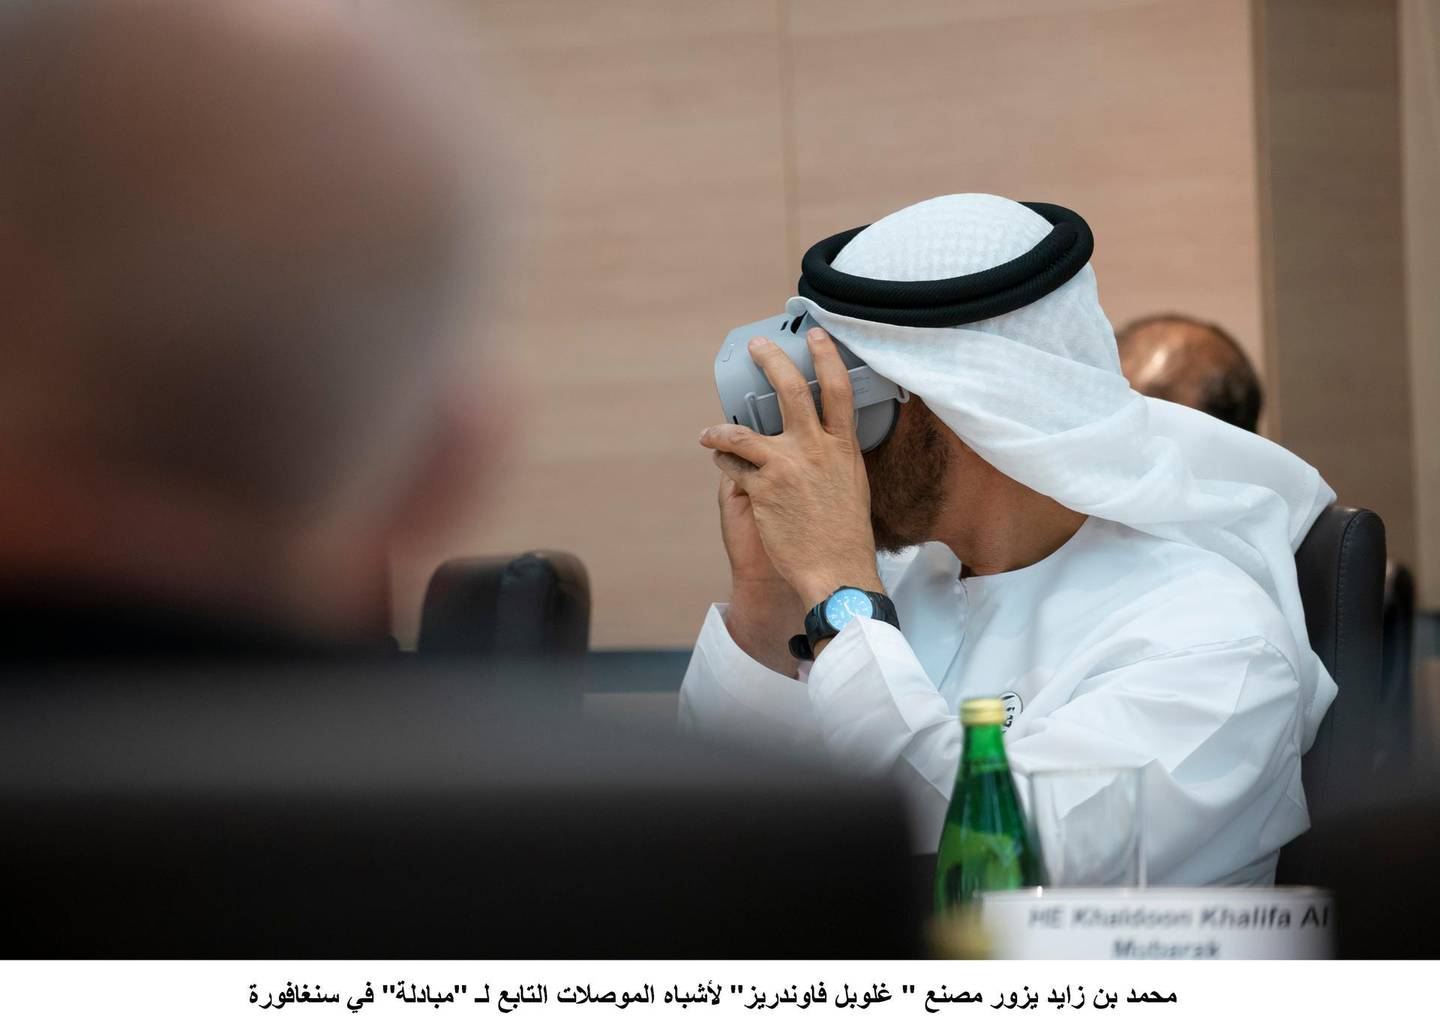 SINGAPORE, SINGAPORE - February 28, 2019: HH Sheikh Mohamed bin Zayed Al Nahyan, Crown Prince of Abu Dhabi and Deputy Supreme Commander of the UAE Armed Forces (L), looks through a virtual reality goggles, during a meeting, at Mubadala's GLOBALFOUNDRIES semiconductor facility.( Ryan Carter for the Ministry of Presidential Affairs )---